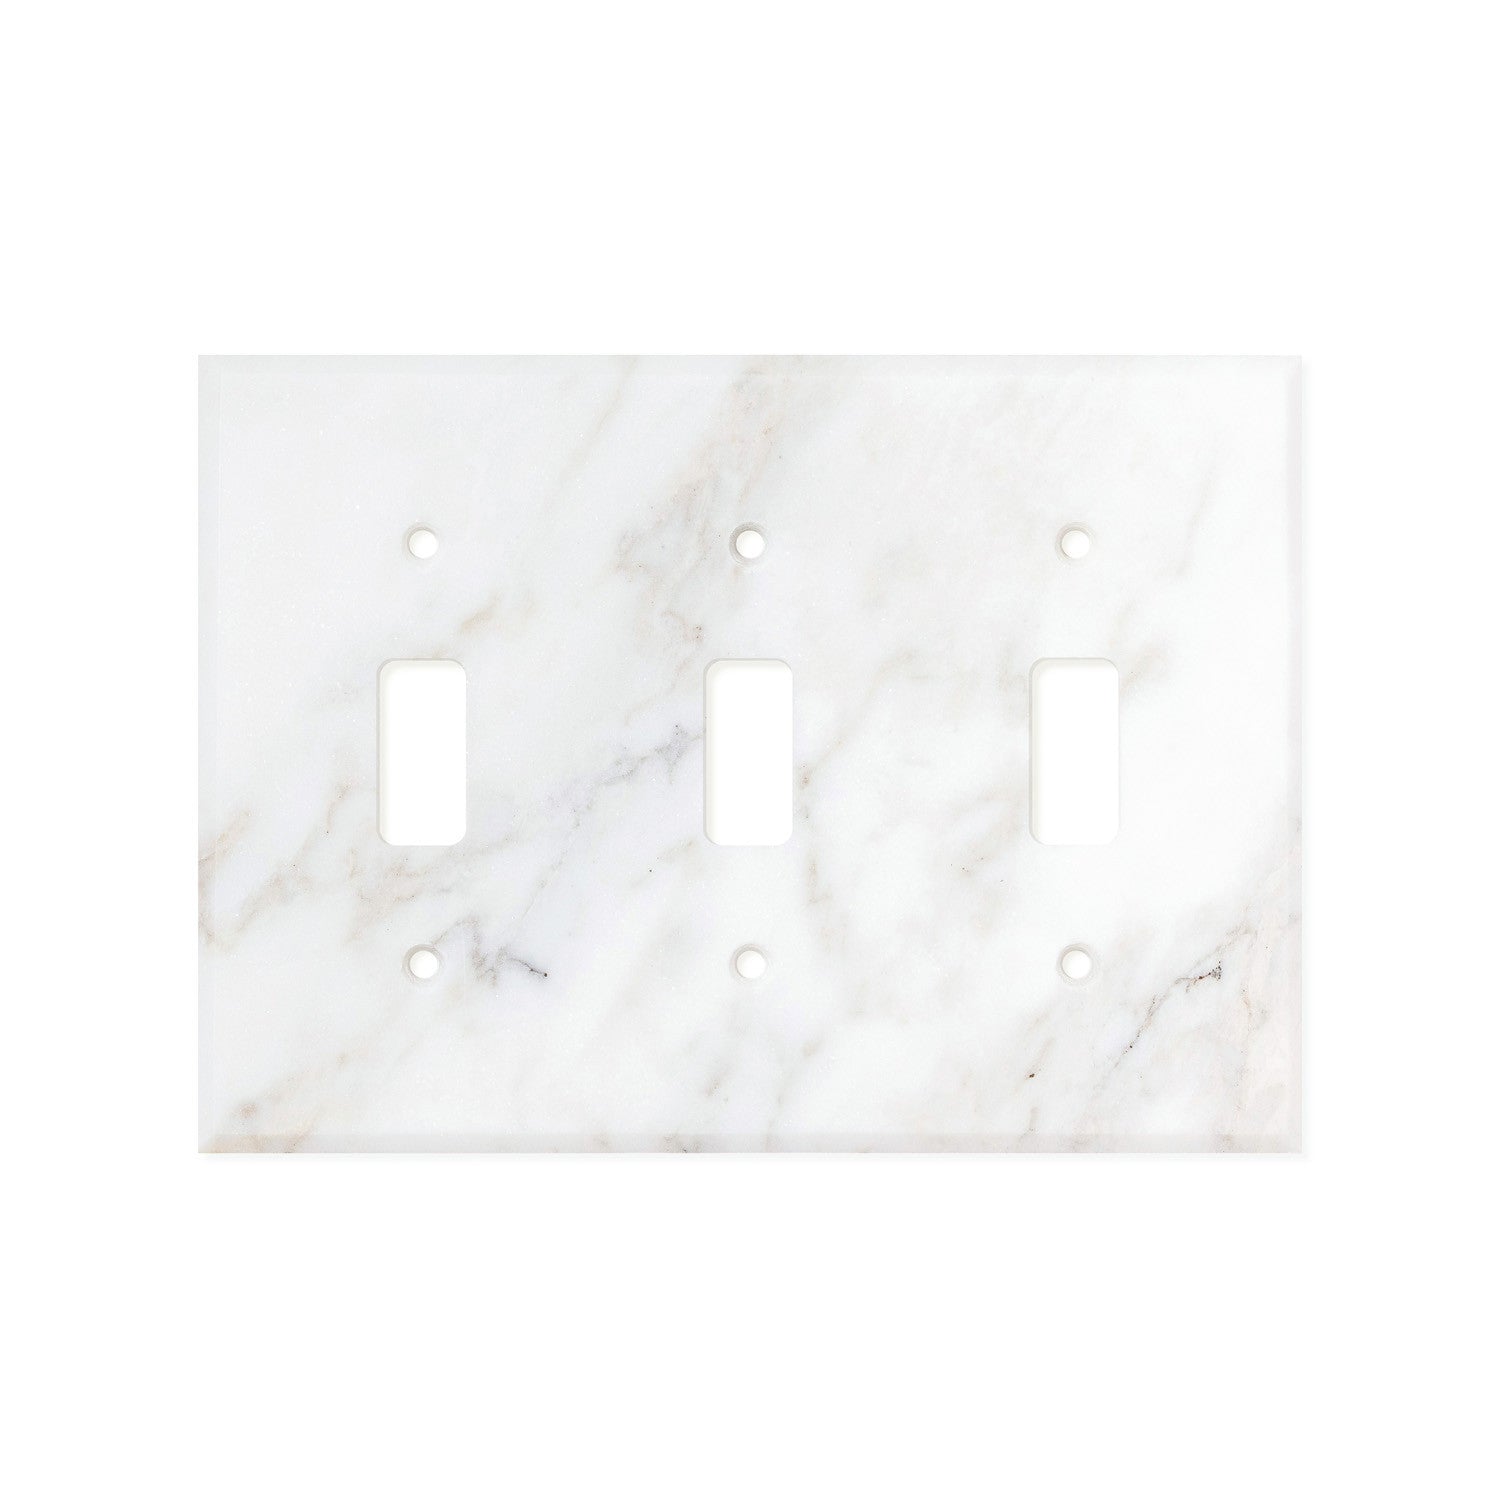 Calacatta Gold Marble Switch Plate Cover, Polished (3 TOGGLE) - Tilephile